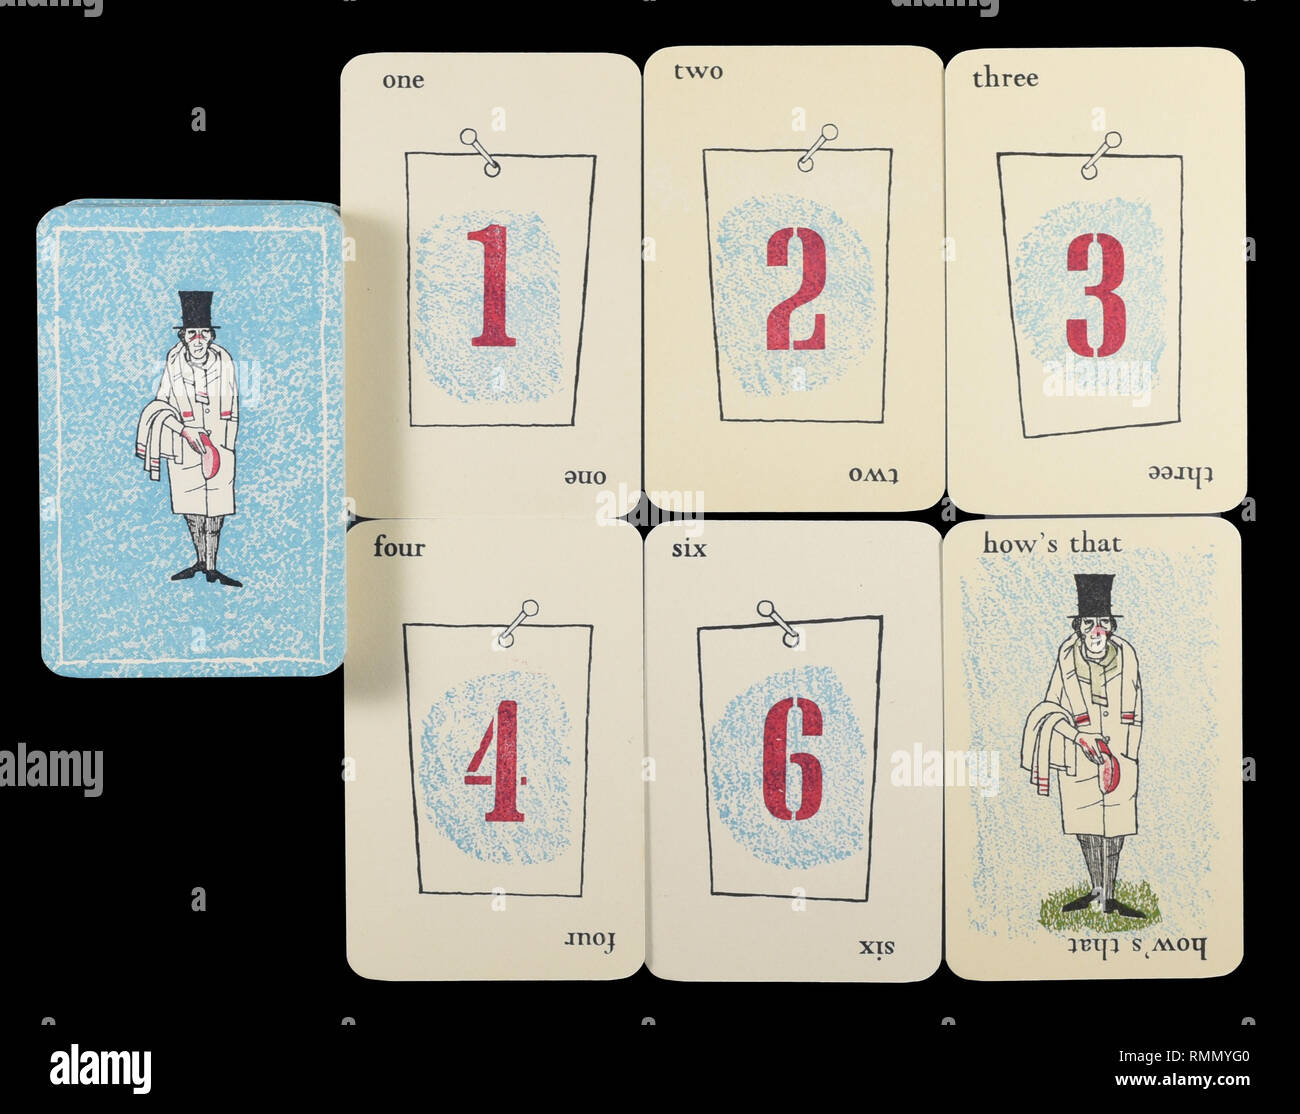 Full set of bowler's playing cards from the vintage cricket card game of GOOGLY by Smith & Hallam Ltd of London. Isolated on black background. Stock Photo